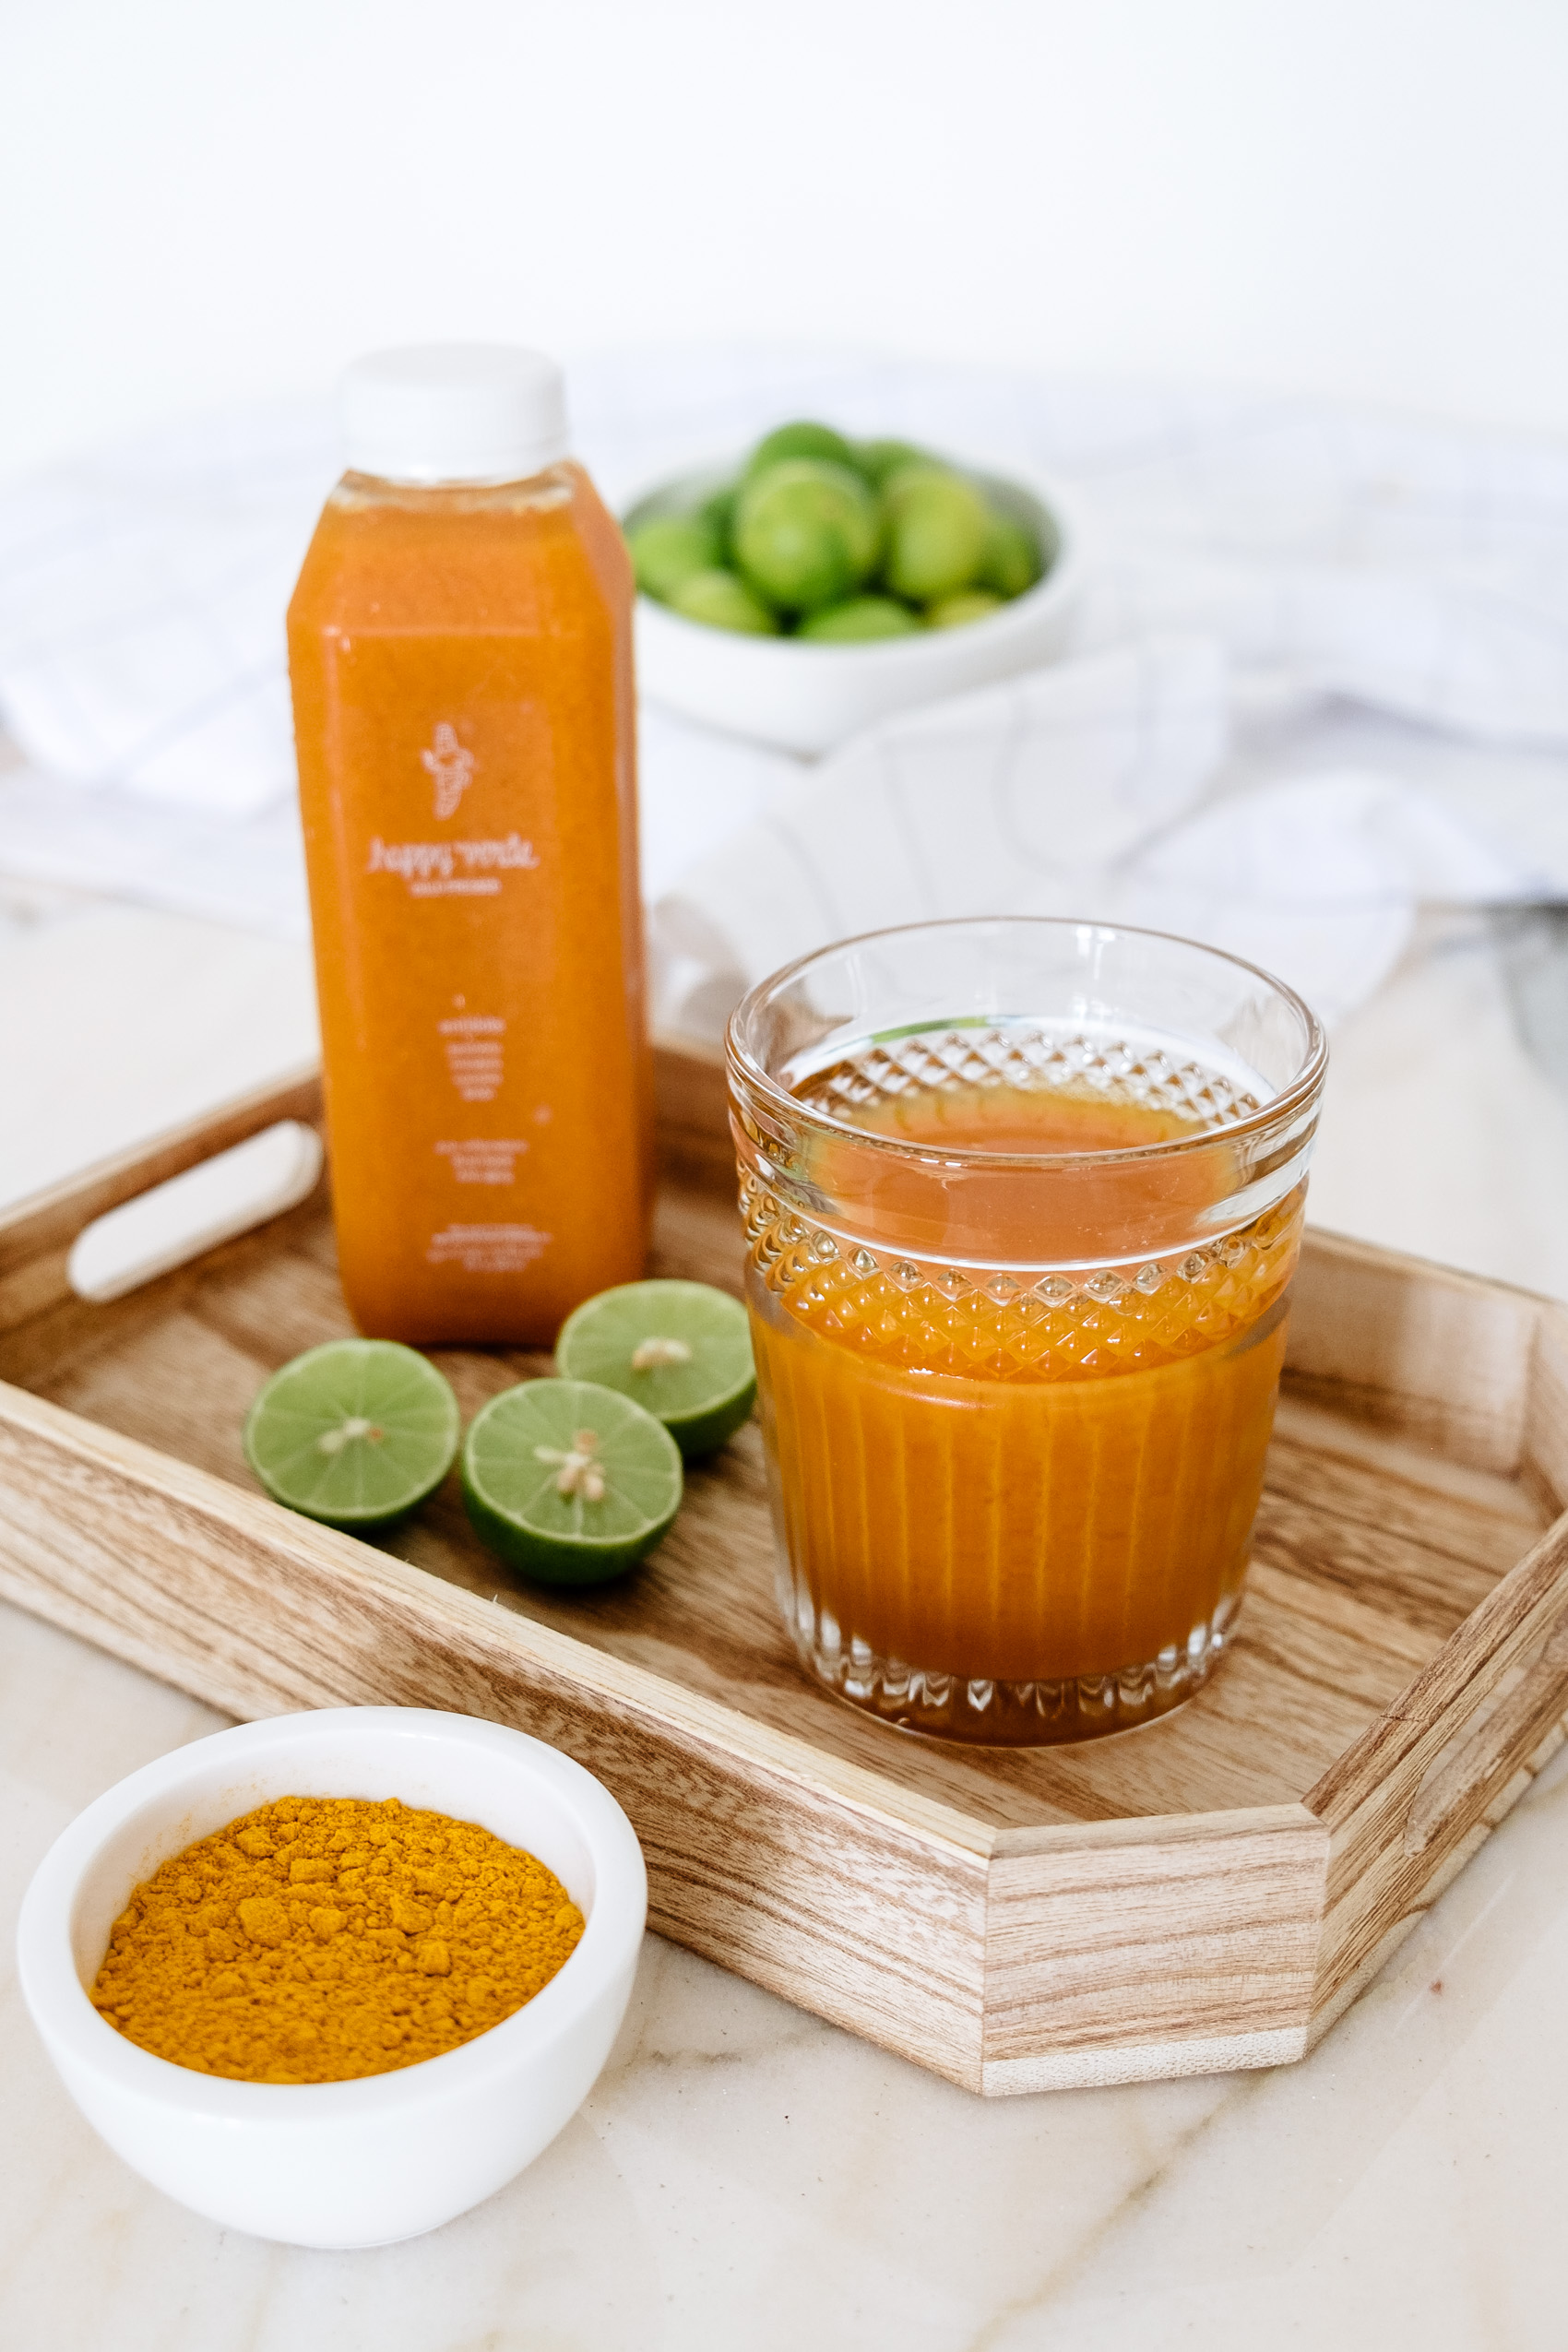 "Antidote" cold-pressed juice by Happy Verde with turmeric, lemon, carrots and apples to address inflammation.